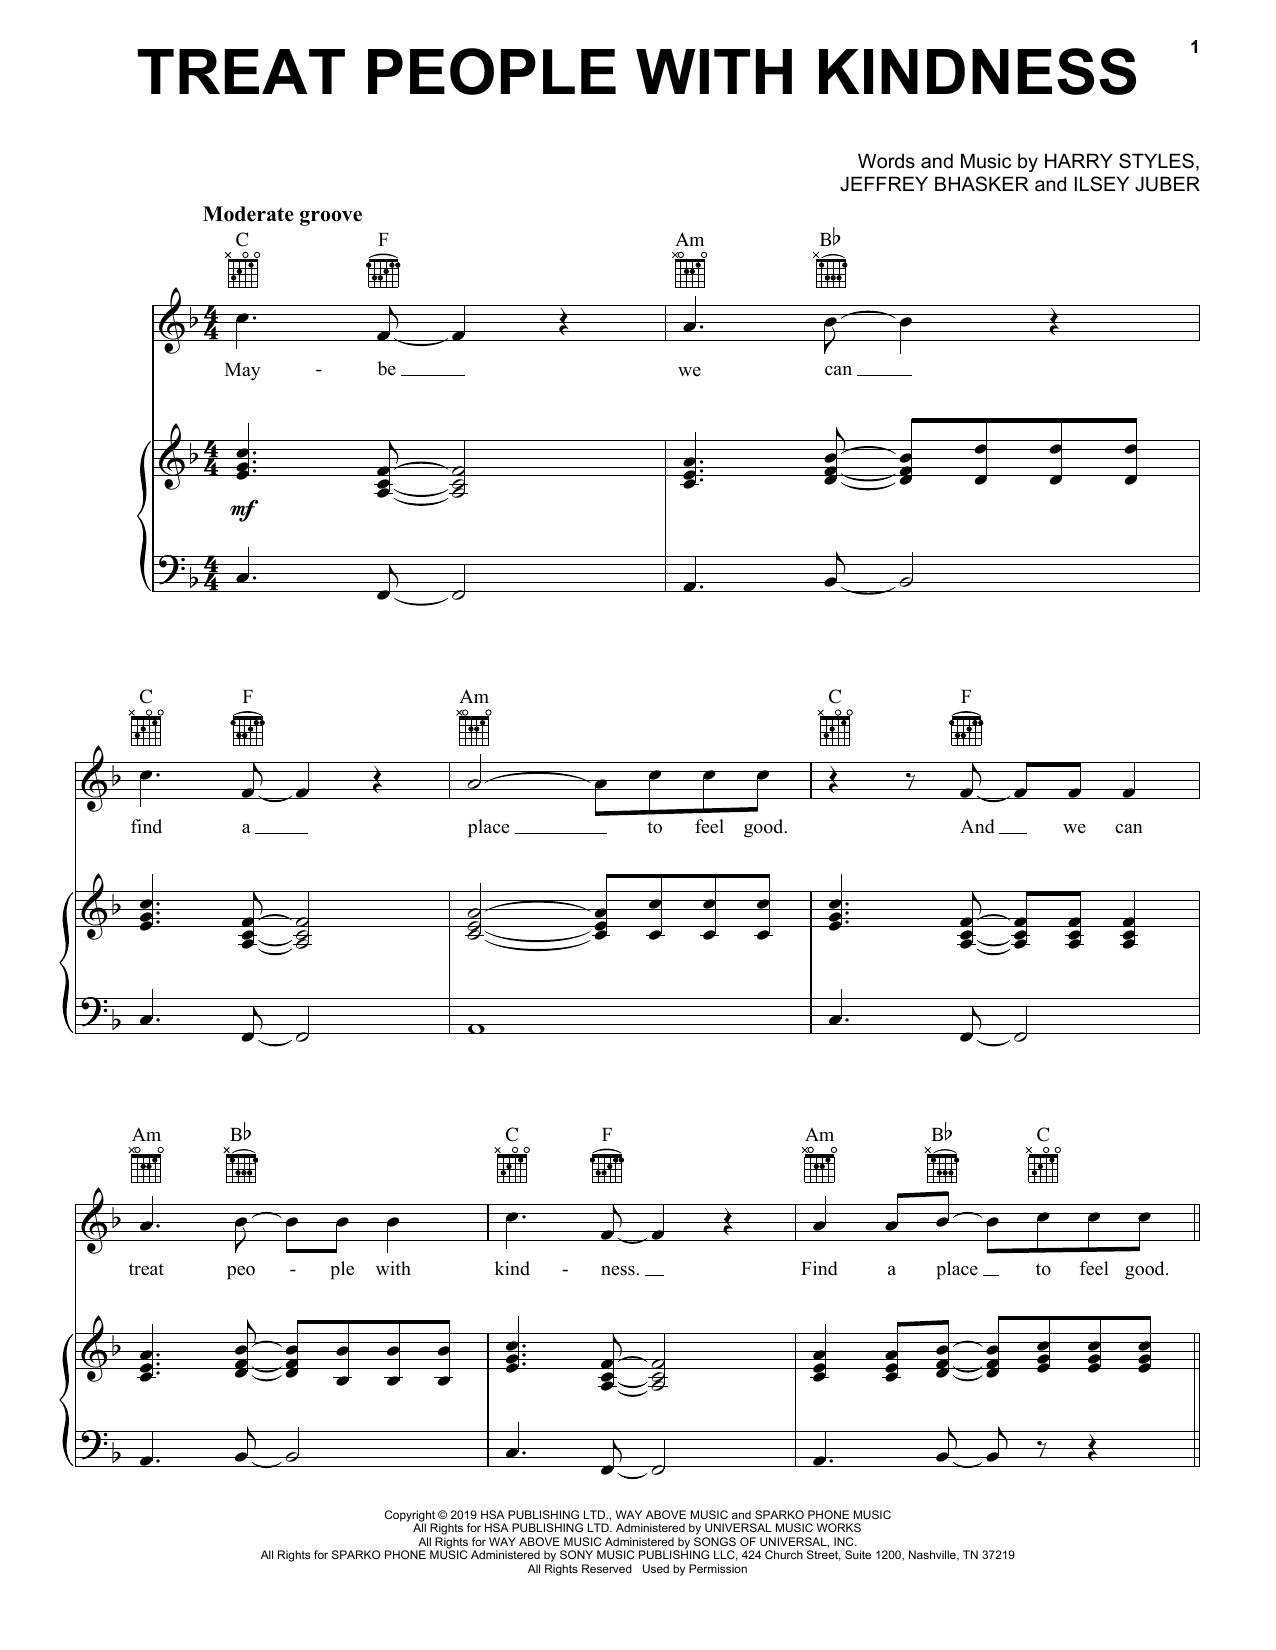 Download Harry Styles Treat People With Kindness Sheet Music